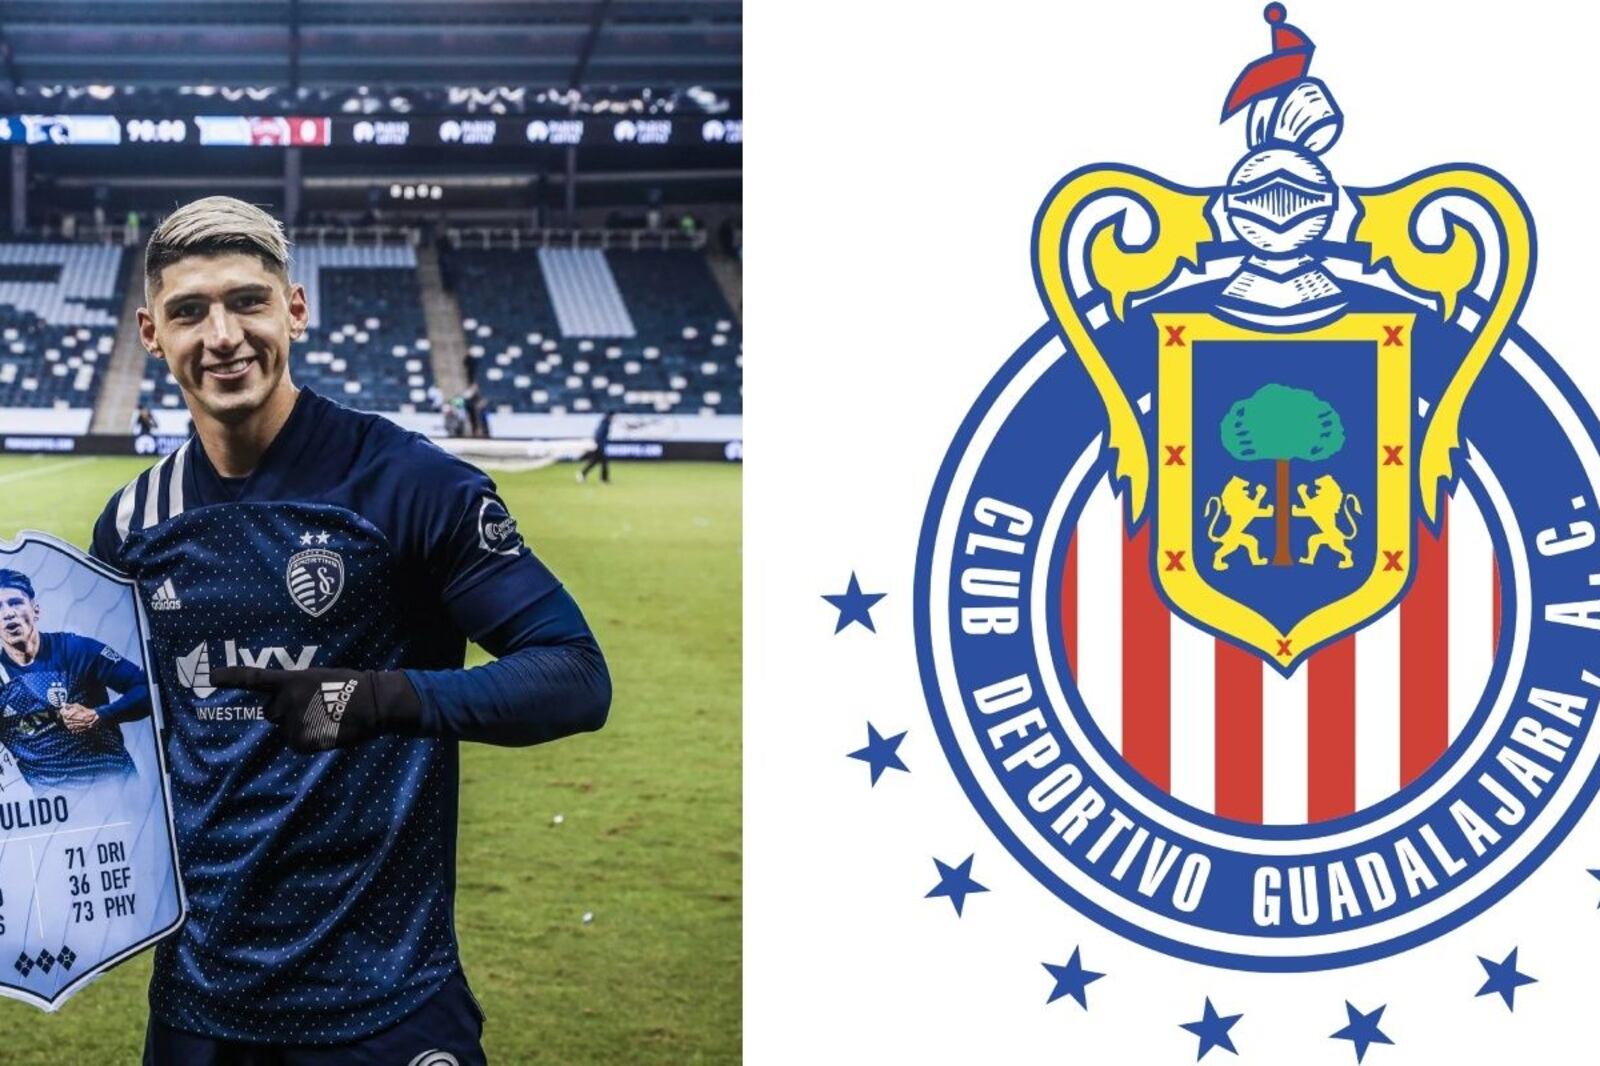 Goodbye Chivas, the reason why Alan Pulido does not want to return to the club